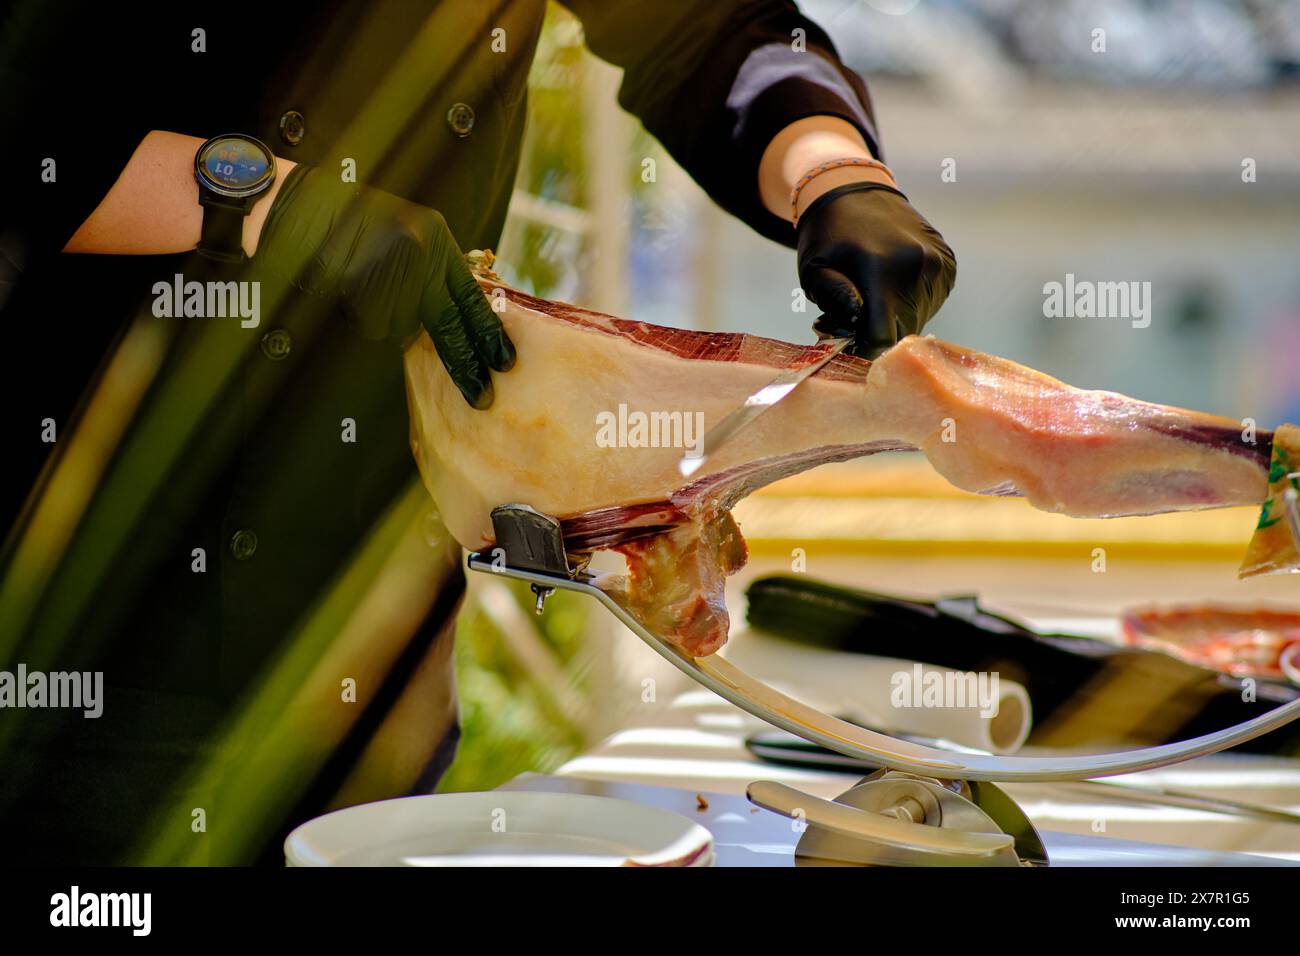 Cropped unrecognizable person in professional attire slicing thin pieces of , a Spanish cured ham, at a gourmet food stall. Stock Photo